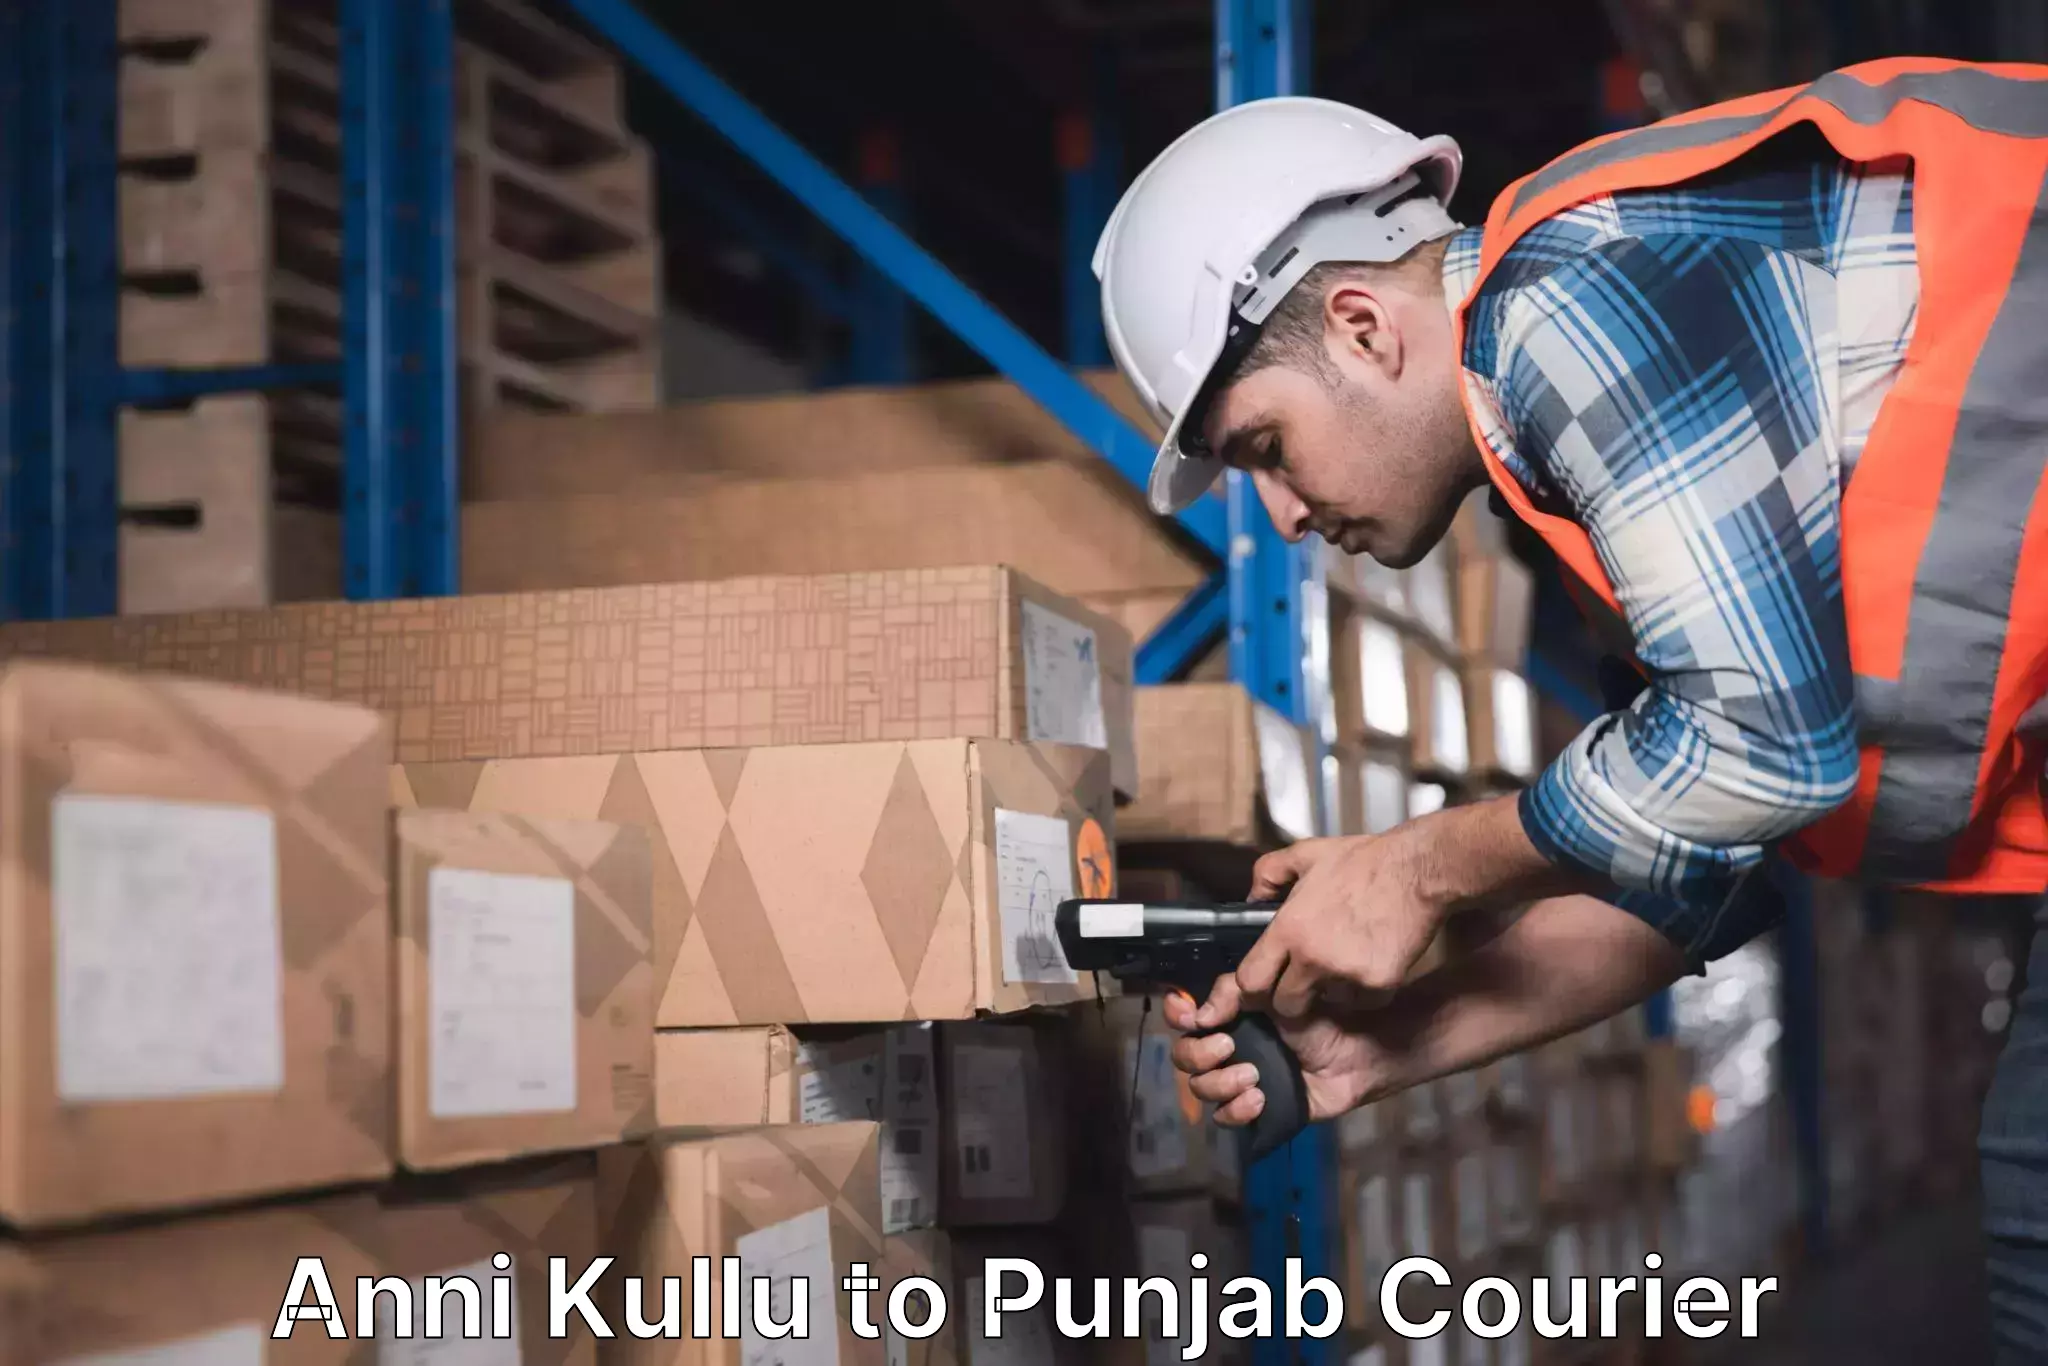 Overnight delivery services Anni Kullu to Amritsar